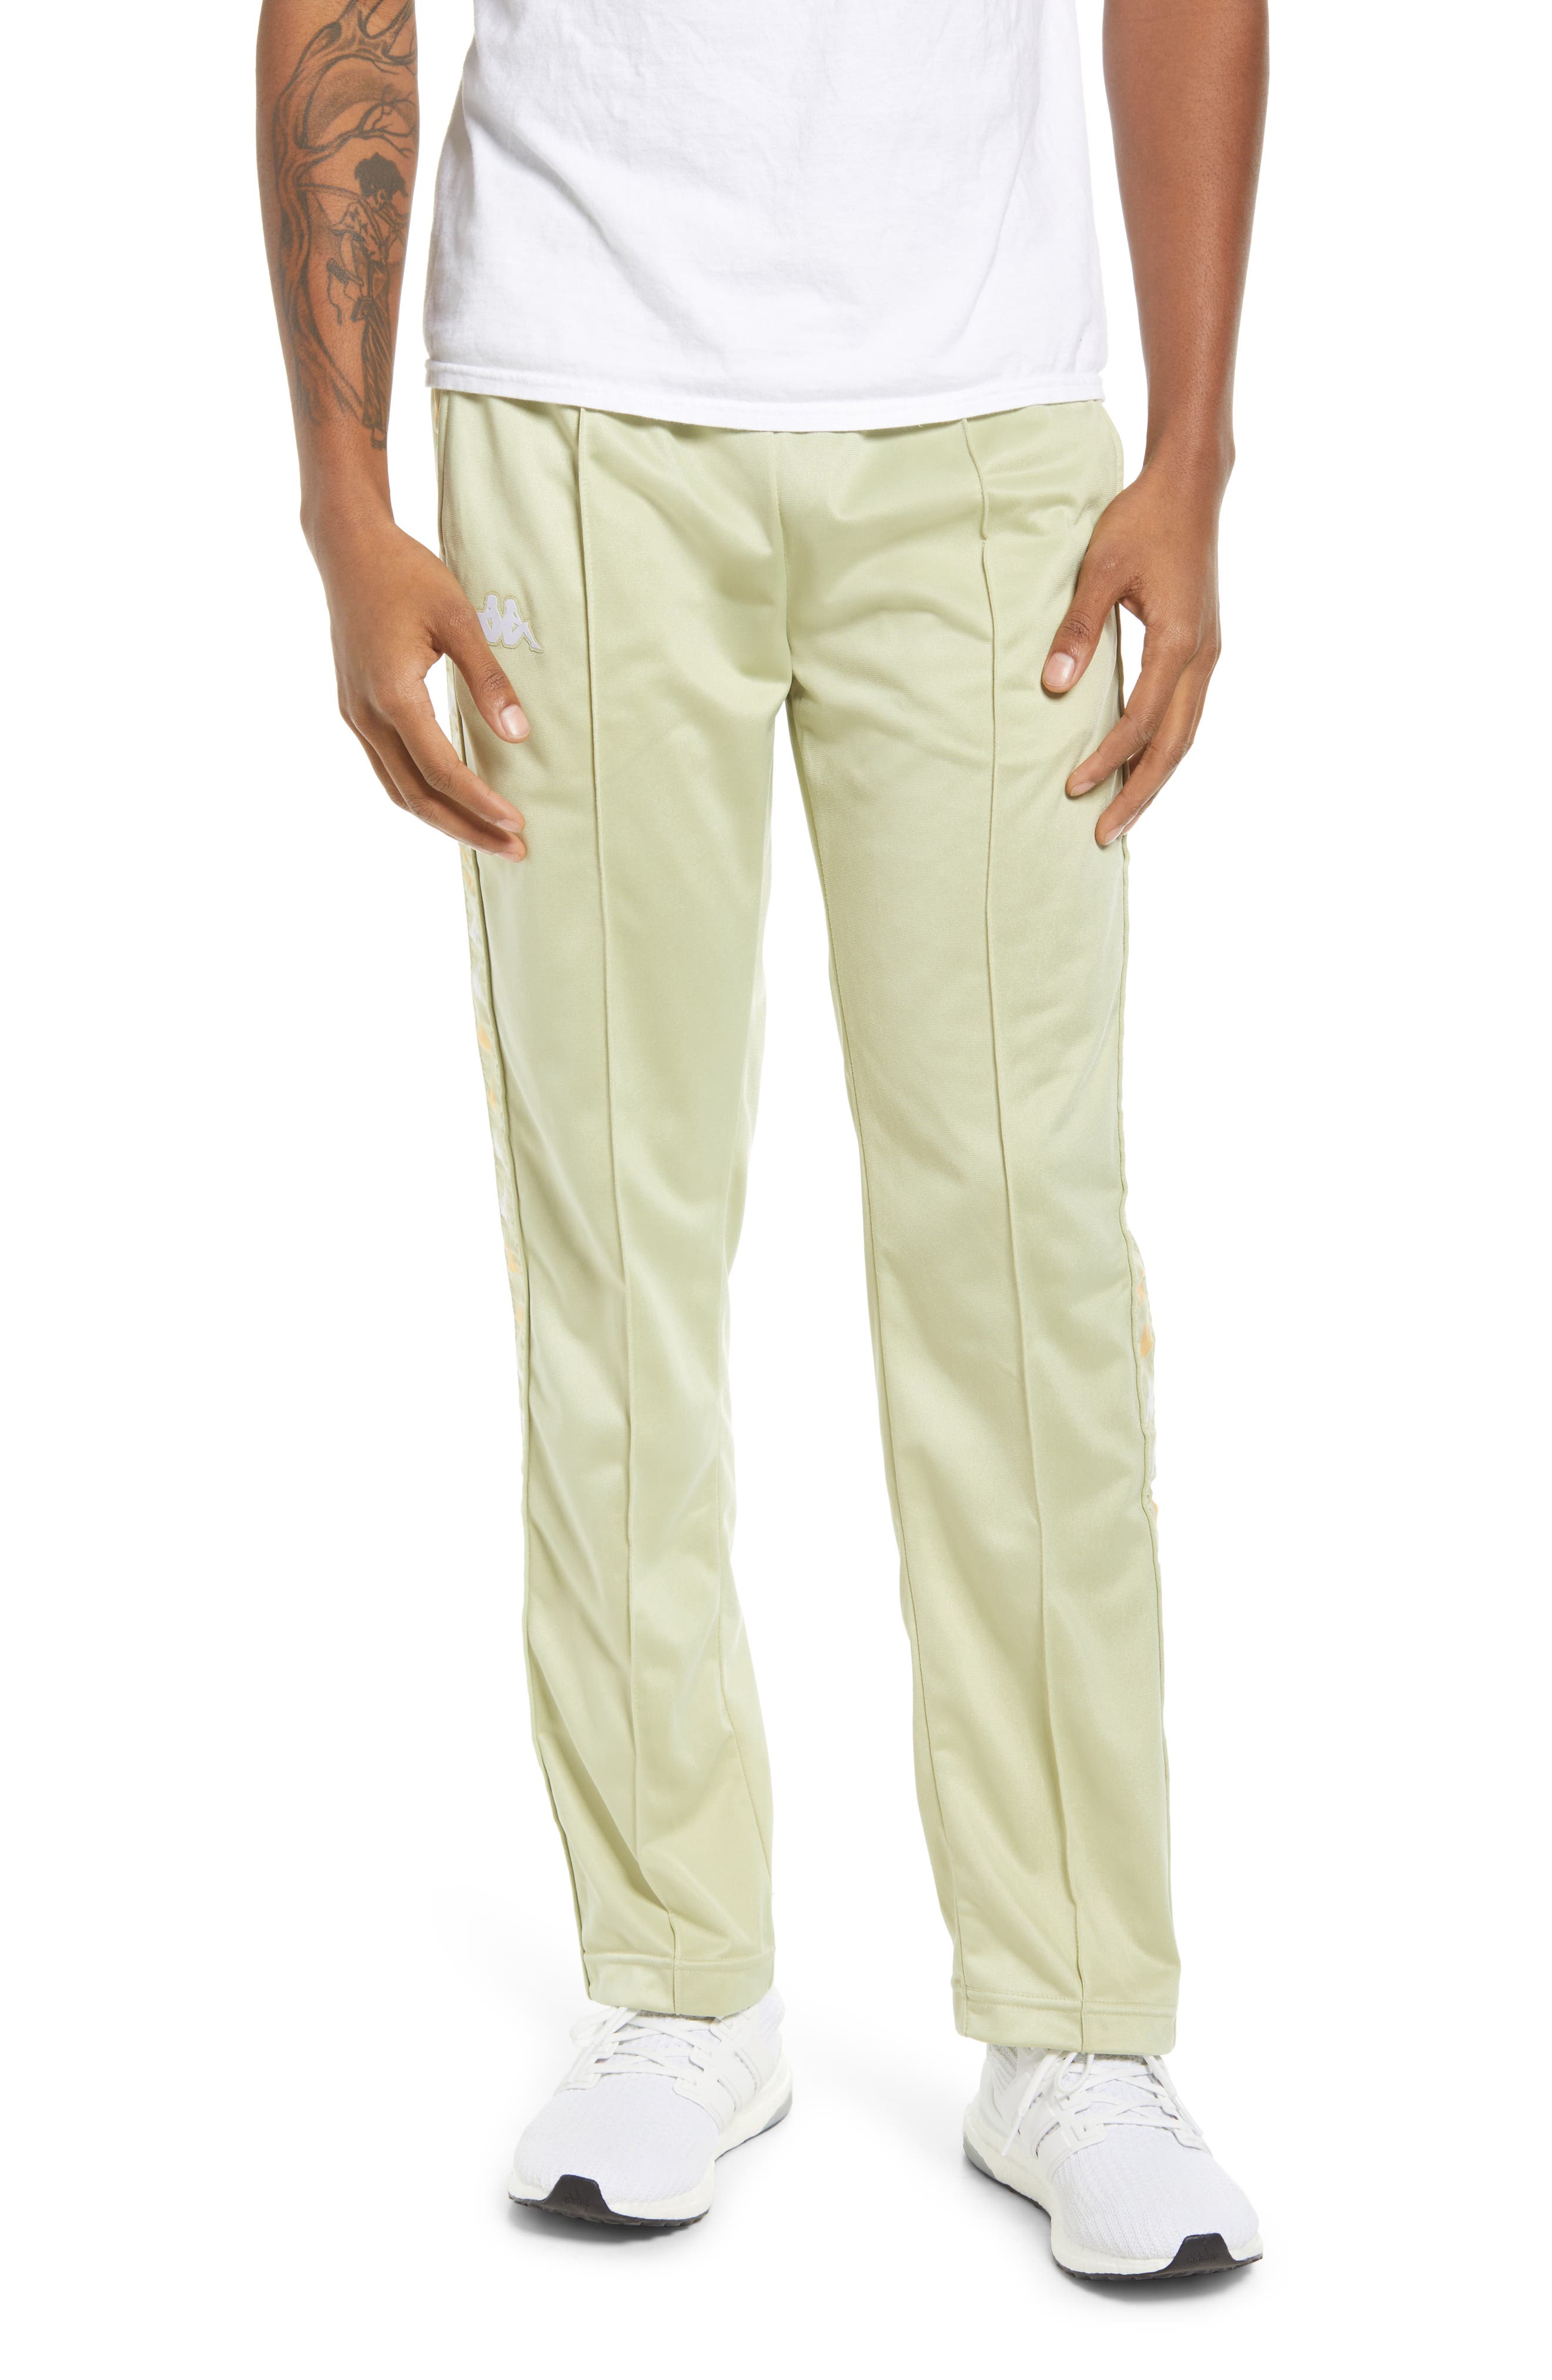 Kappa Men's Authentic Astoriazz Track Pants in Green Glycerine-Yellow-White at Nordstrom, Size Small